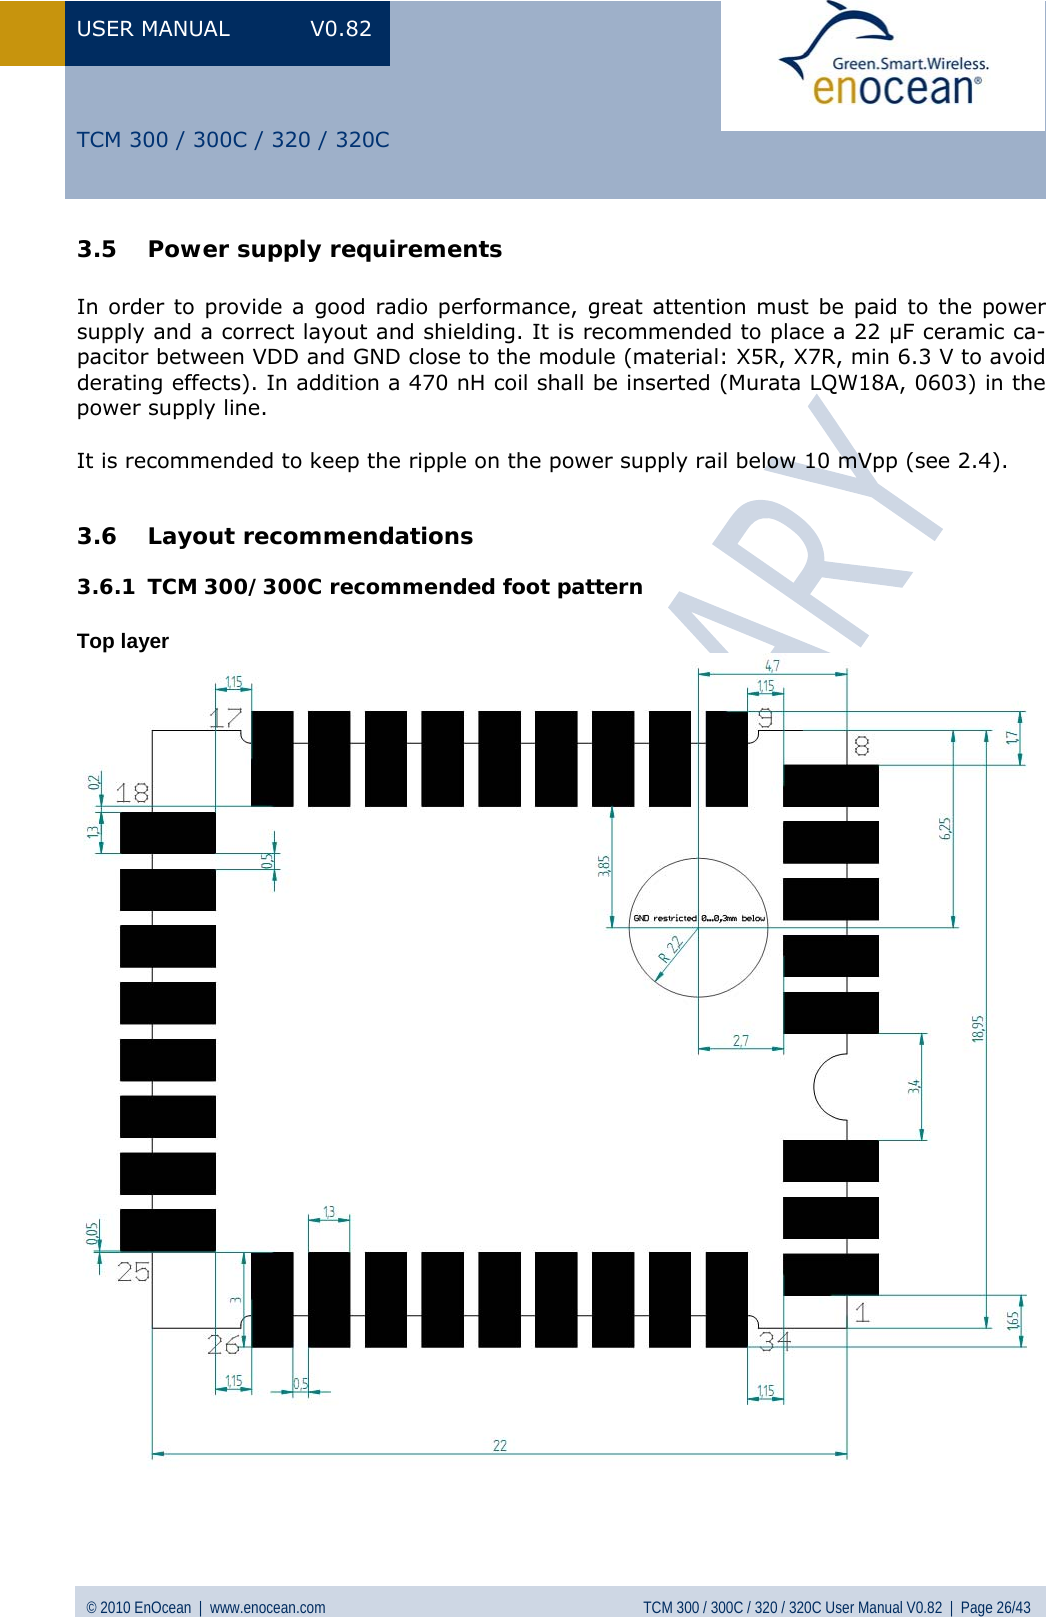 USER MANUAL V0.82 © 2010 EnOcean  |  www.enocean.com  TCM 300 / 300C / 320 / 320C User Manual V0.82  |  Page 26/43   TCM 300 / 300C / 320 / 320C 3.5 Power supply requirements  In order to provide a good radio performance, great attention must be paid to the power supply and a correct layout and shielding. It is recommended to place a 22 µF ceramic ca-pacitor between VDD and GND close to the module (material: X5R, X7R, min 6.3 V to avoid derating effects). In addition a 470 nH coil shall be inserted (Murata LQW18A, 0603) in the power supply line.  It is recommended to keep the ripple on the power supply rail below 10 mVpp (see  2.4).  3.6 Layout recommendations 3.6.1 TCM 300/300C recommended foot pattern  Top layer                        